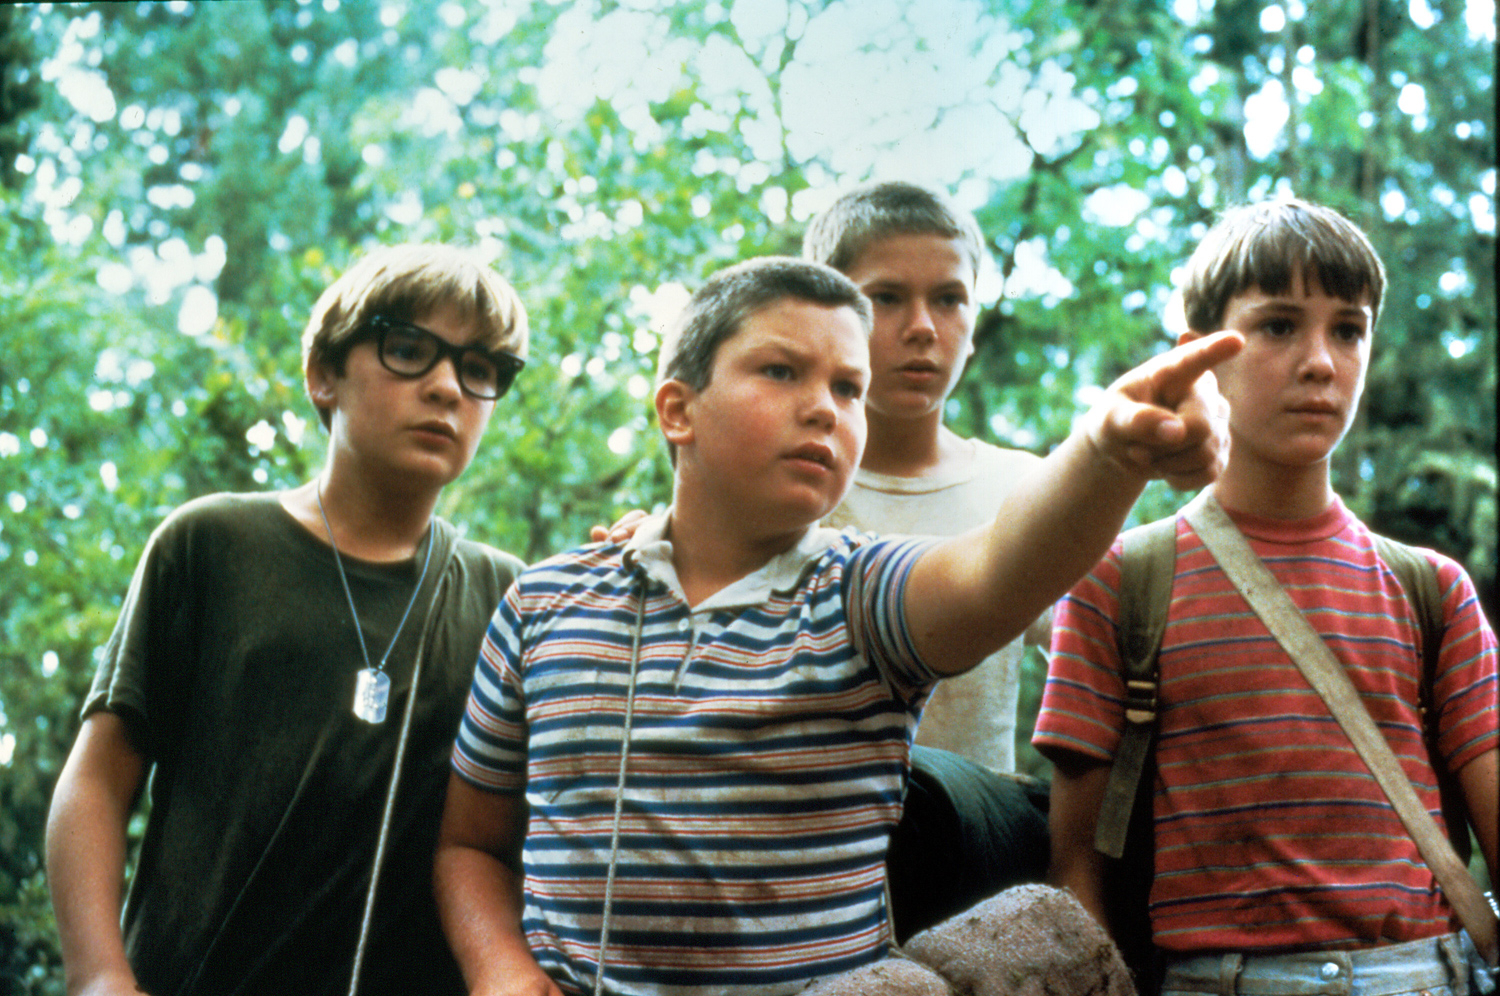 Join the Fun in Brownsville and Celebrate Stand By Me Day on July 23rd